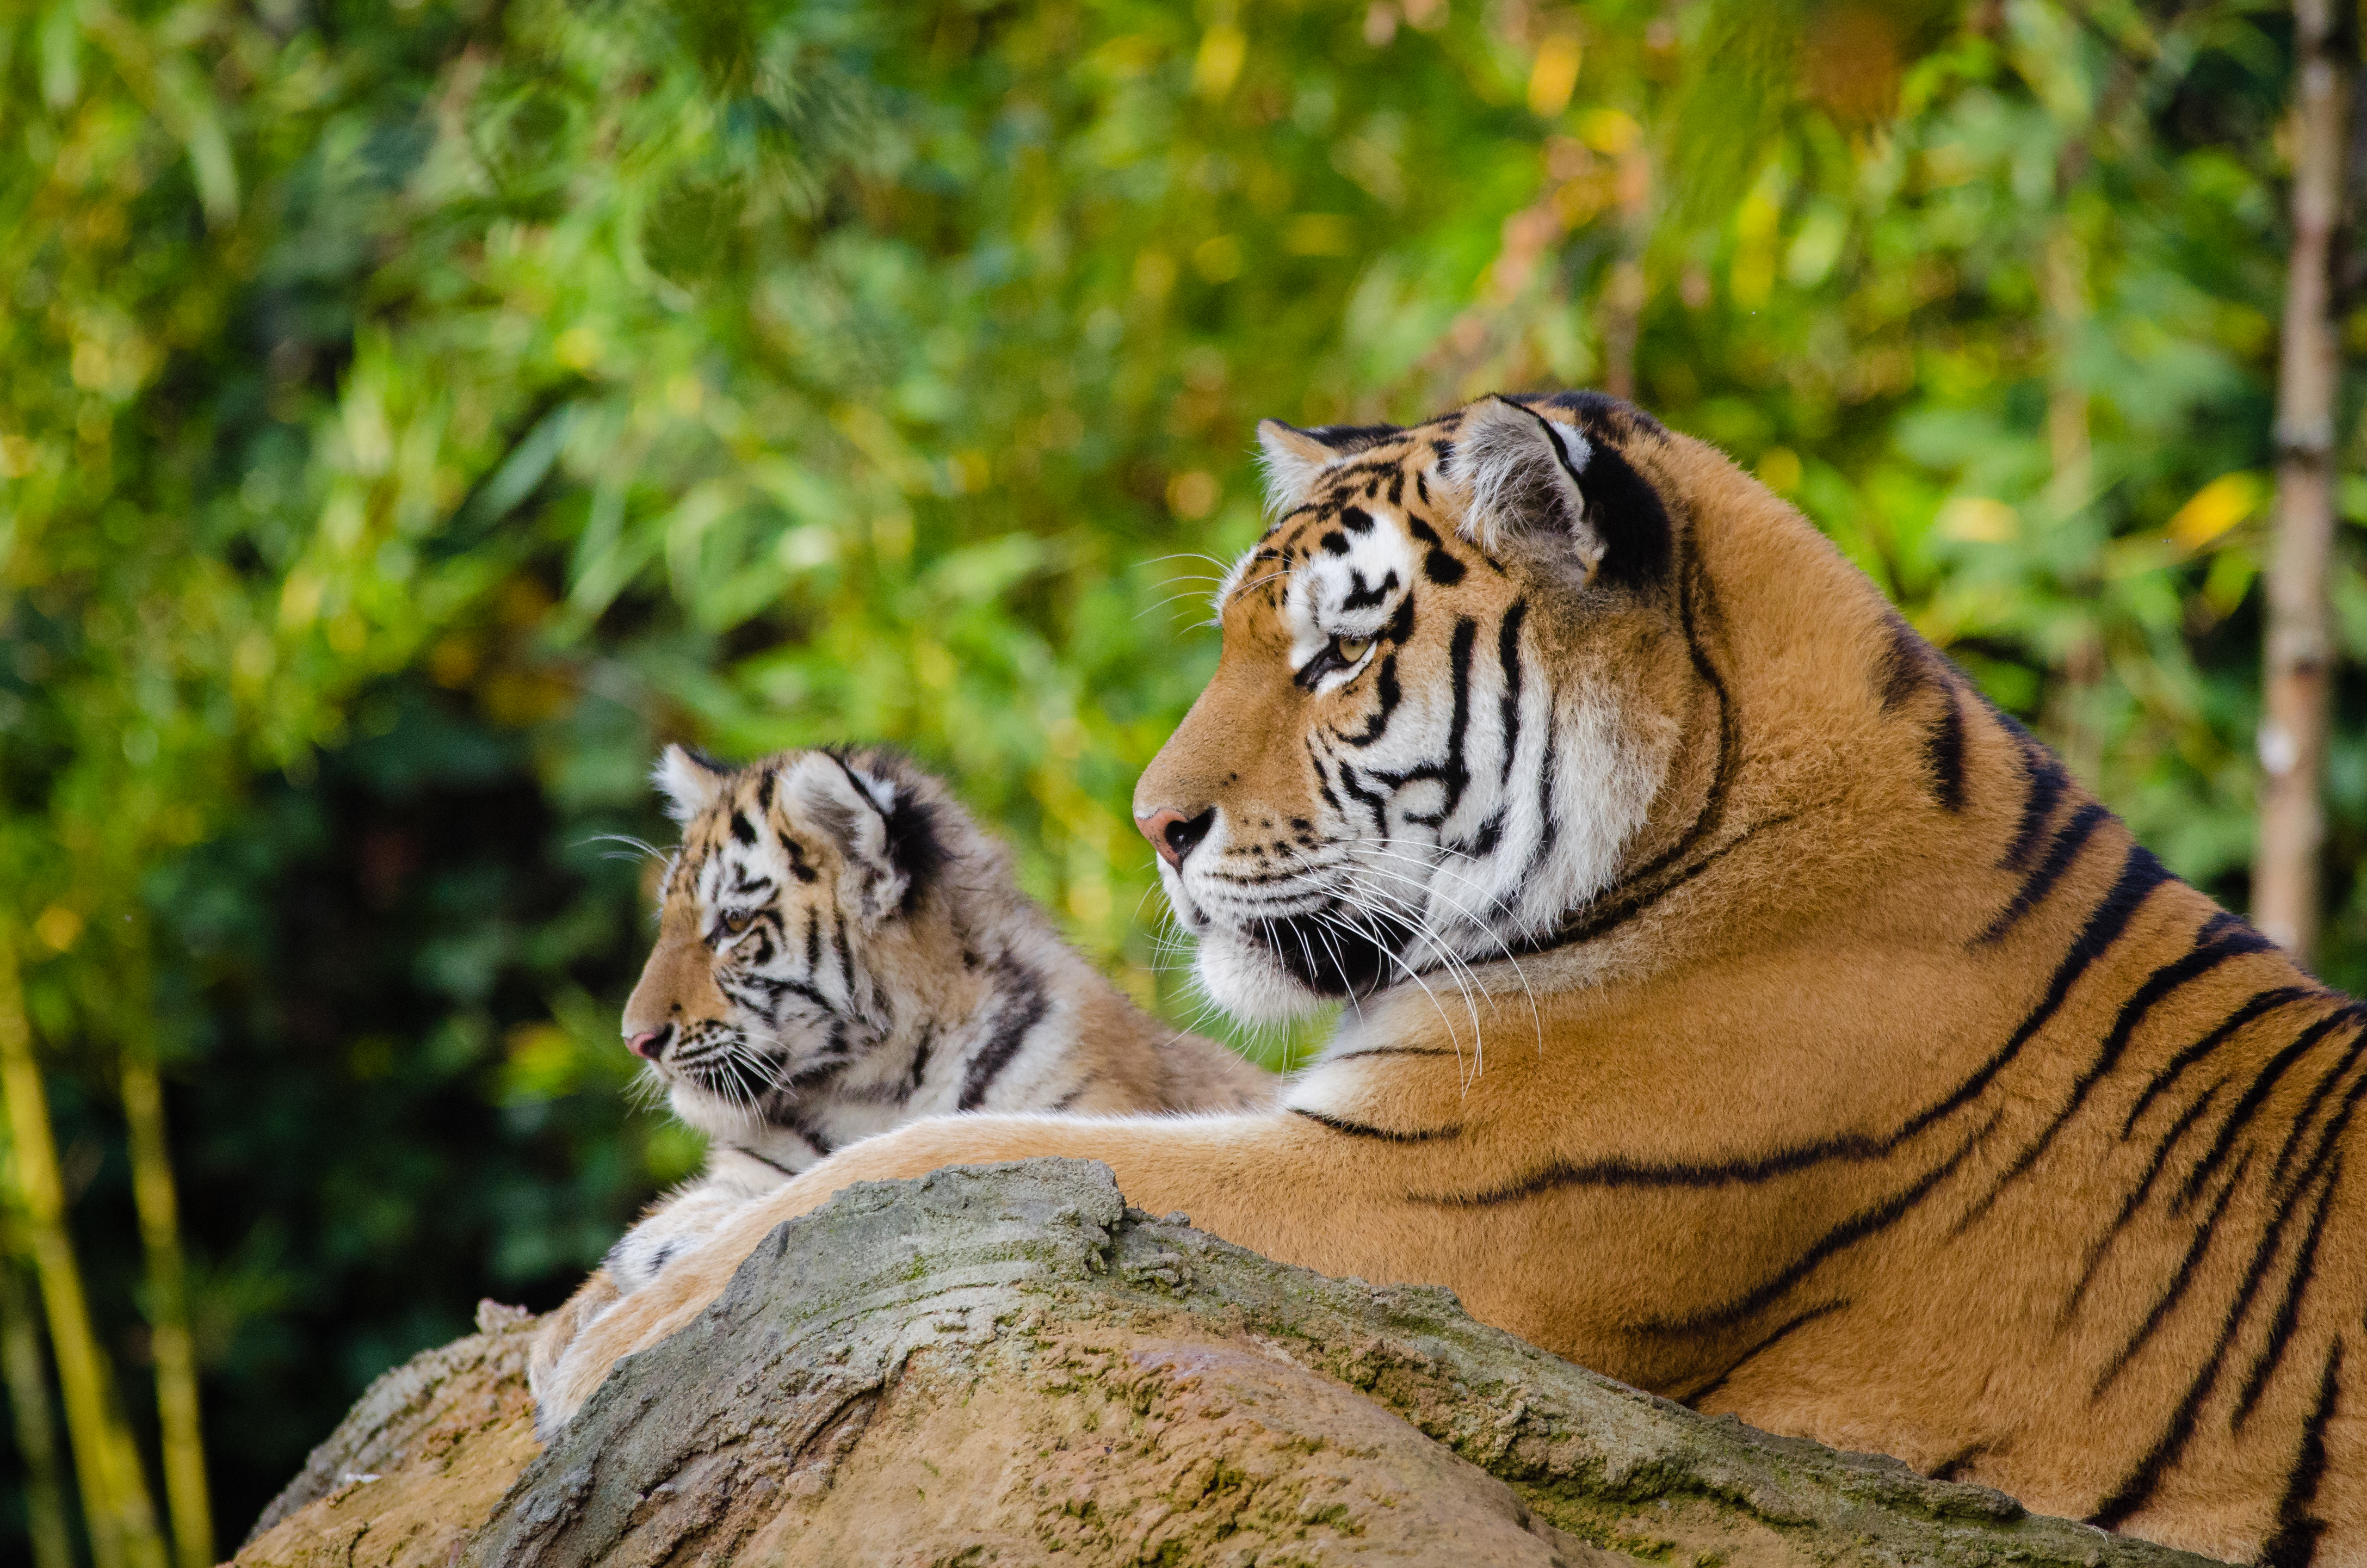 Bengal tiger mother with cub age four months - Stock Image - C042/8495 -  Science Photo Library